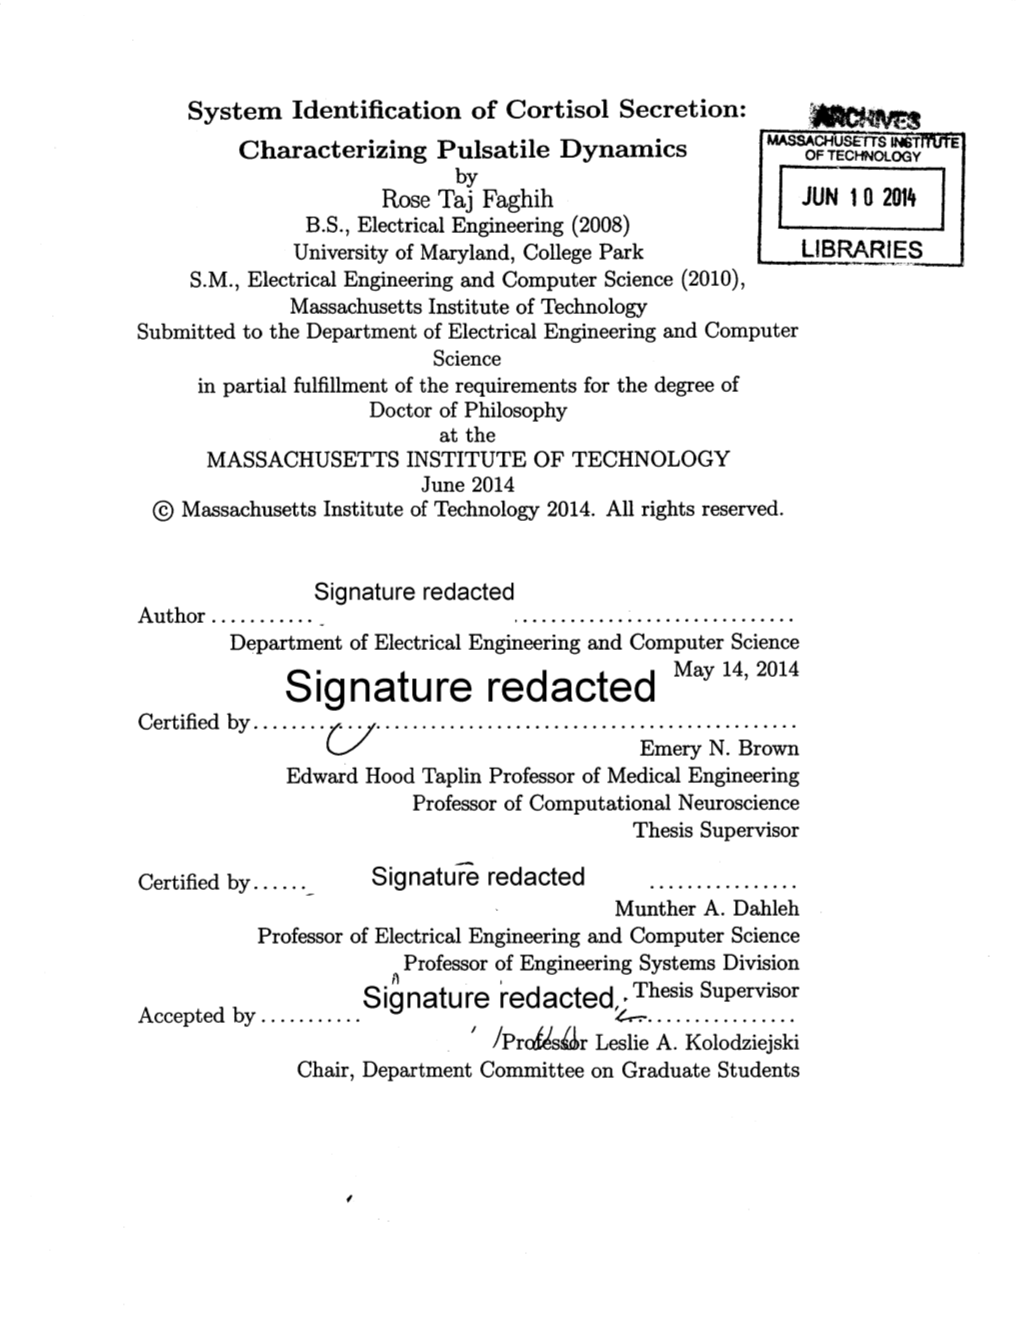 Signature Redacted May 14,2014 Certified By